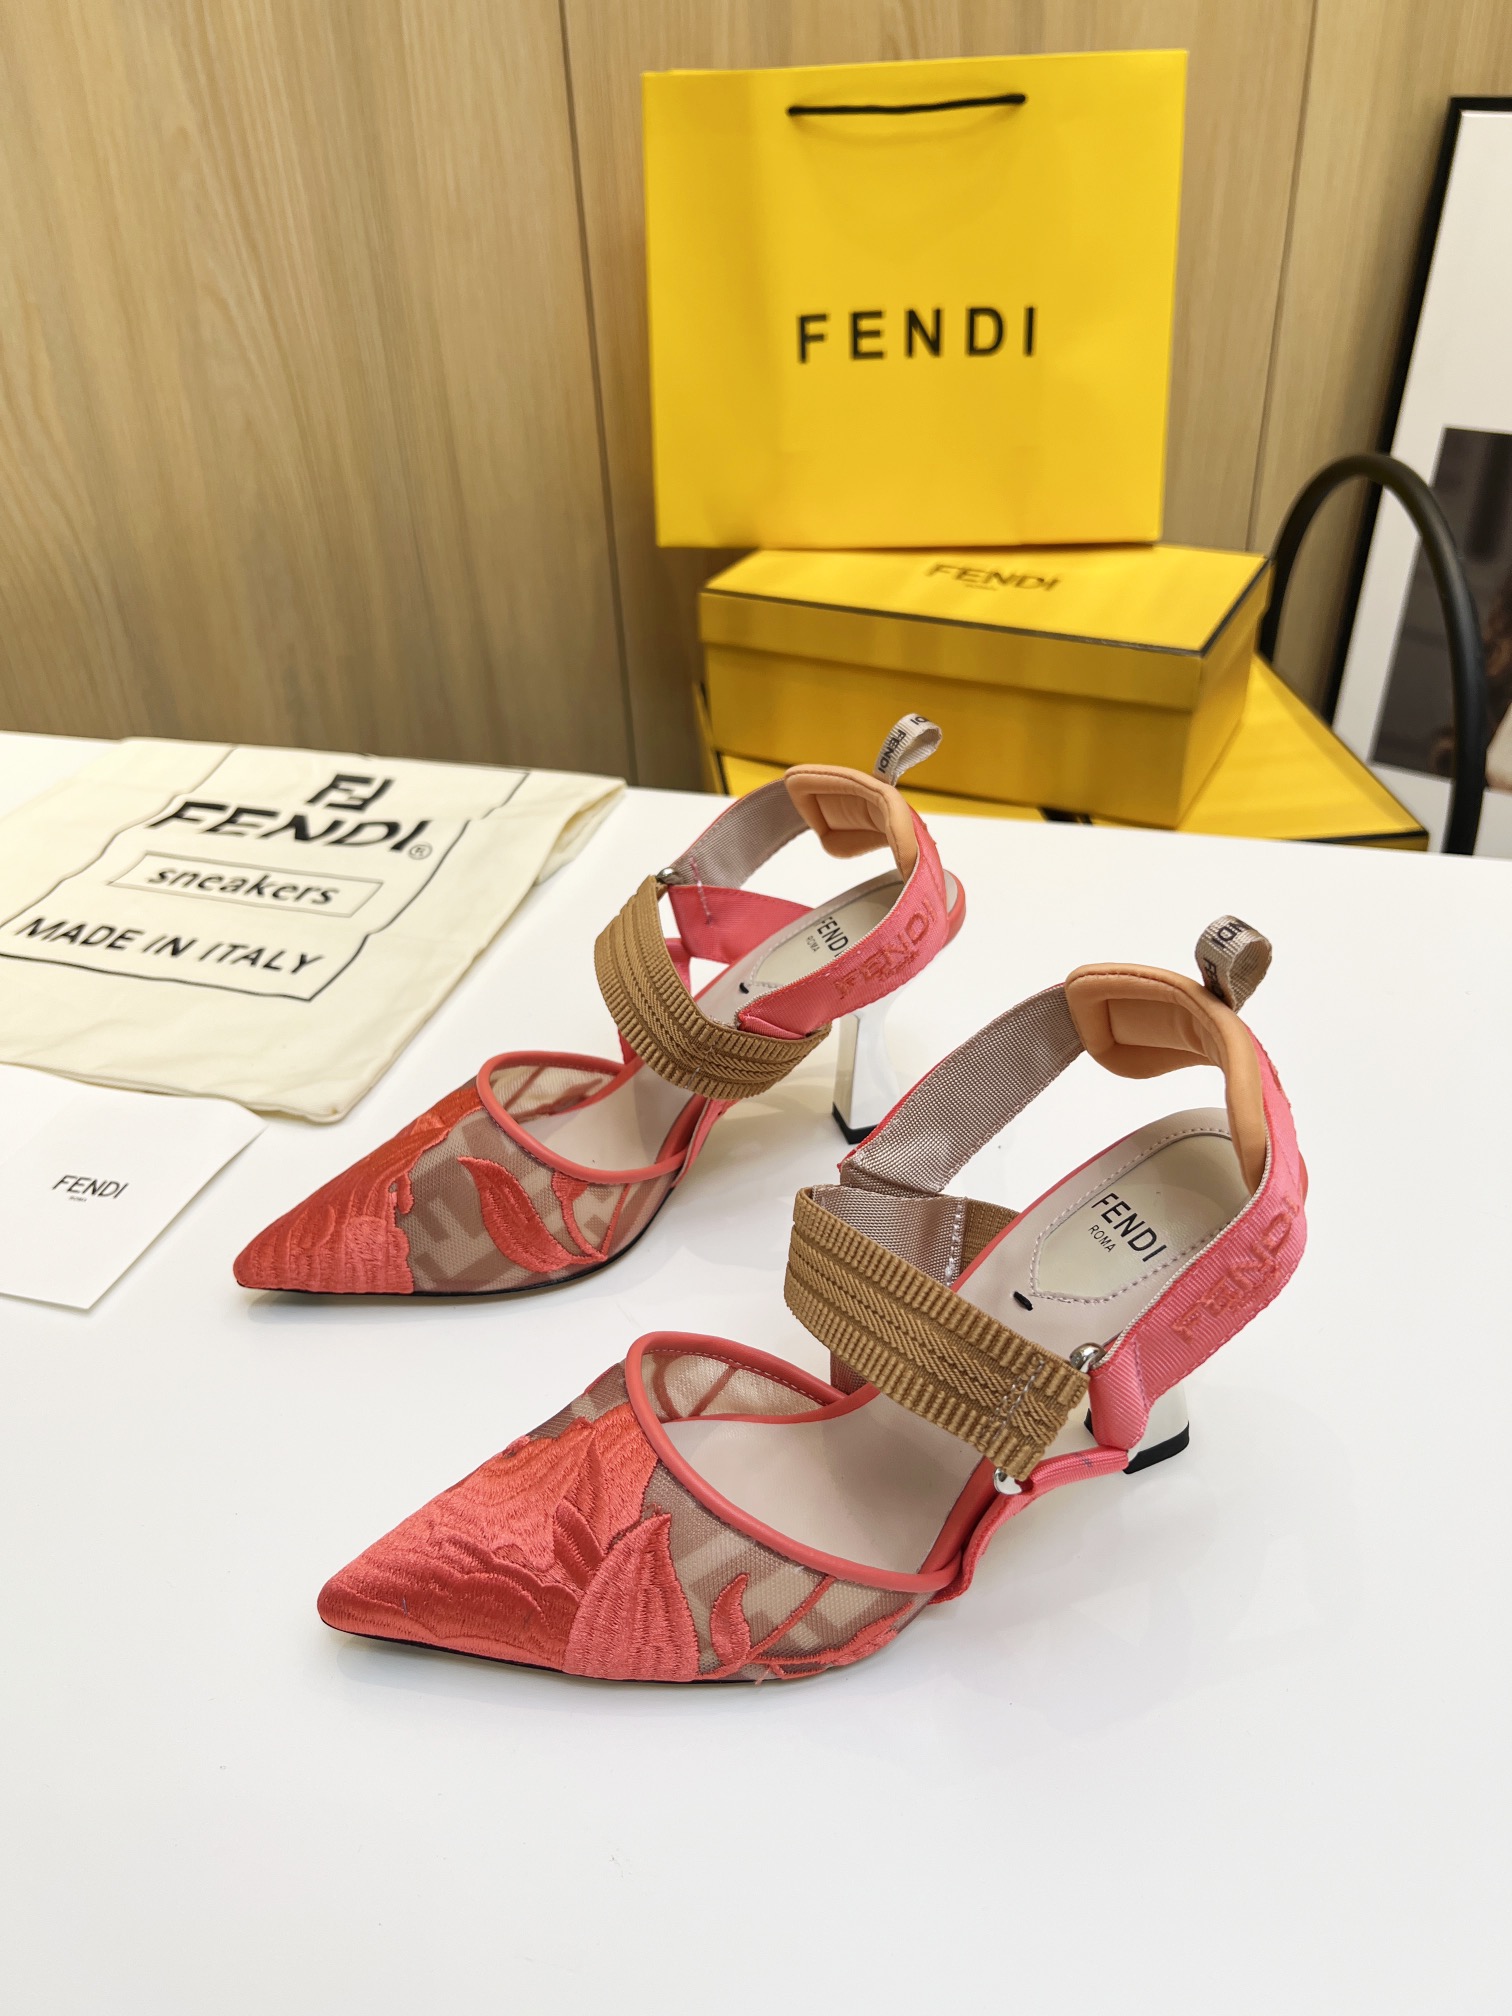 From China
 Fendi Shoes High Heel Pumps Buy best quality Replica
 Embroidery Rubber Spring Collection